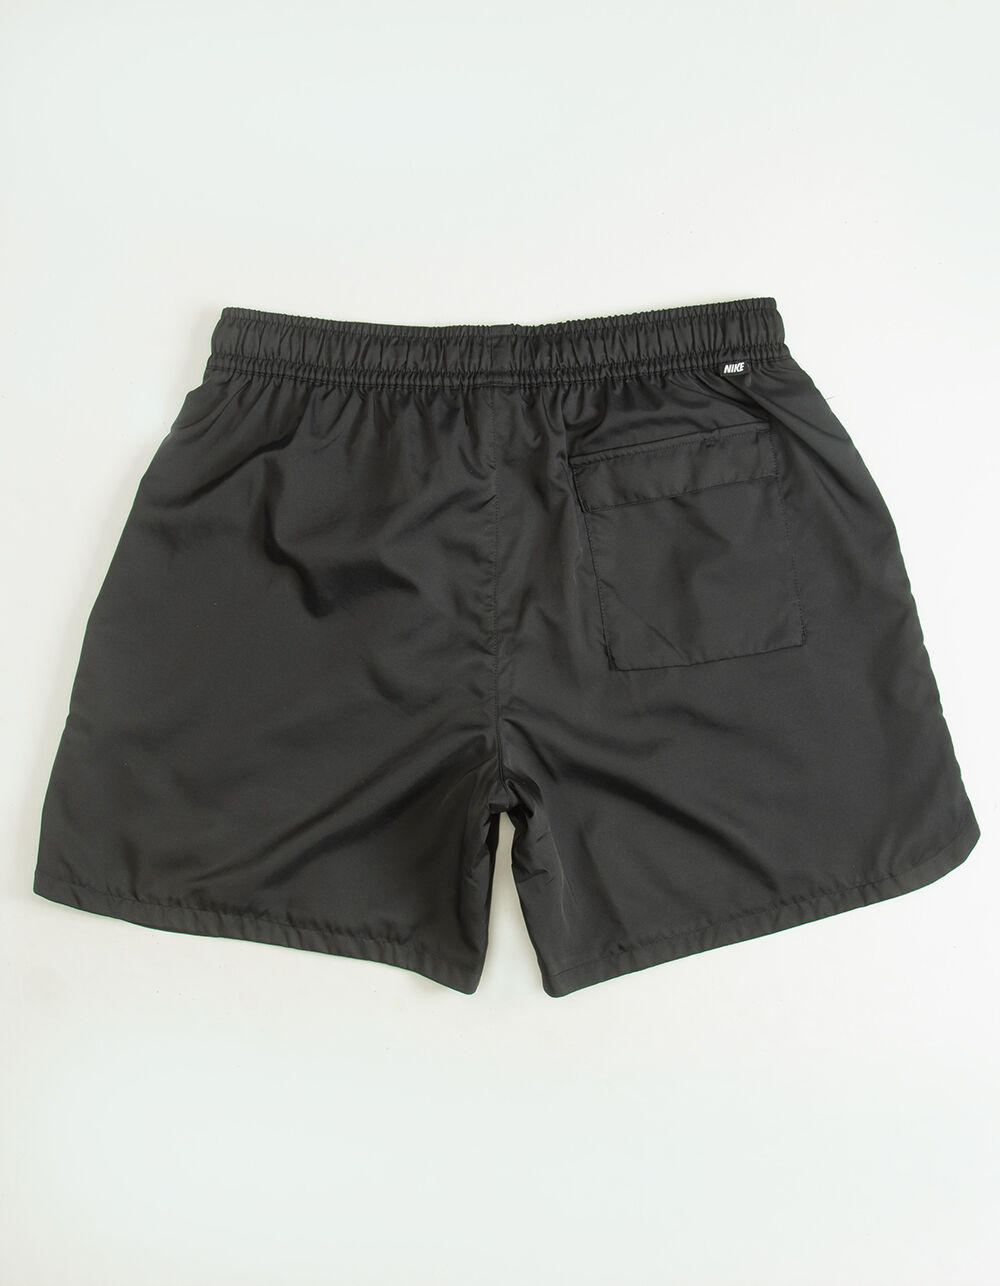 NIKE Sport Essentials Woven Lined Flow Mens Shorts - BLACK